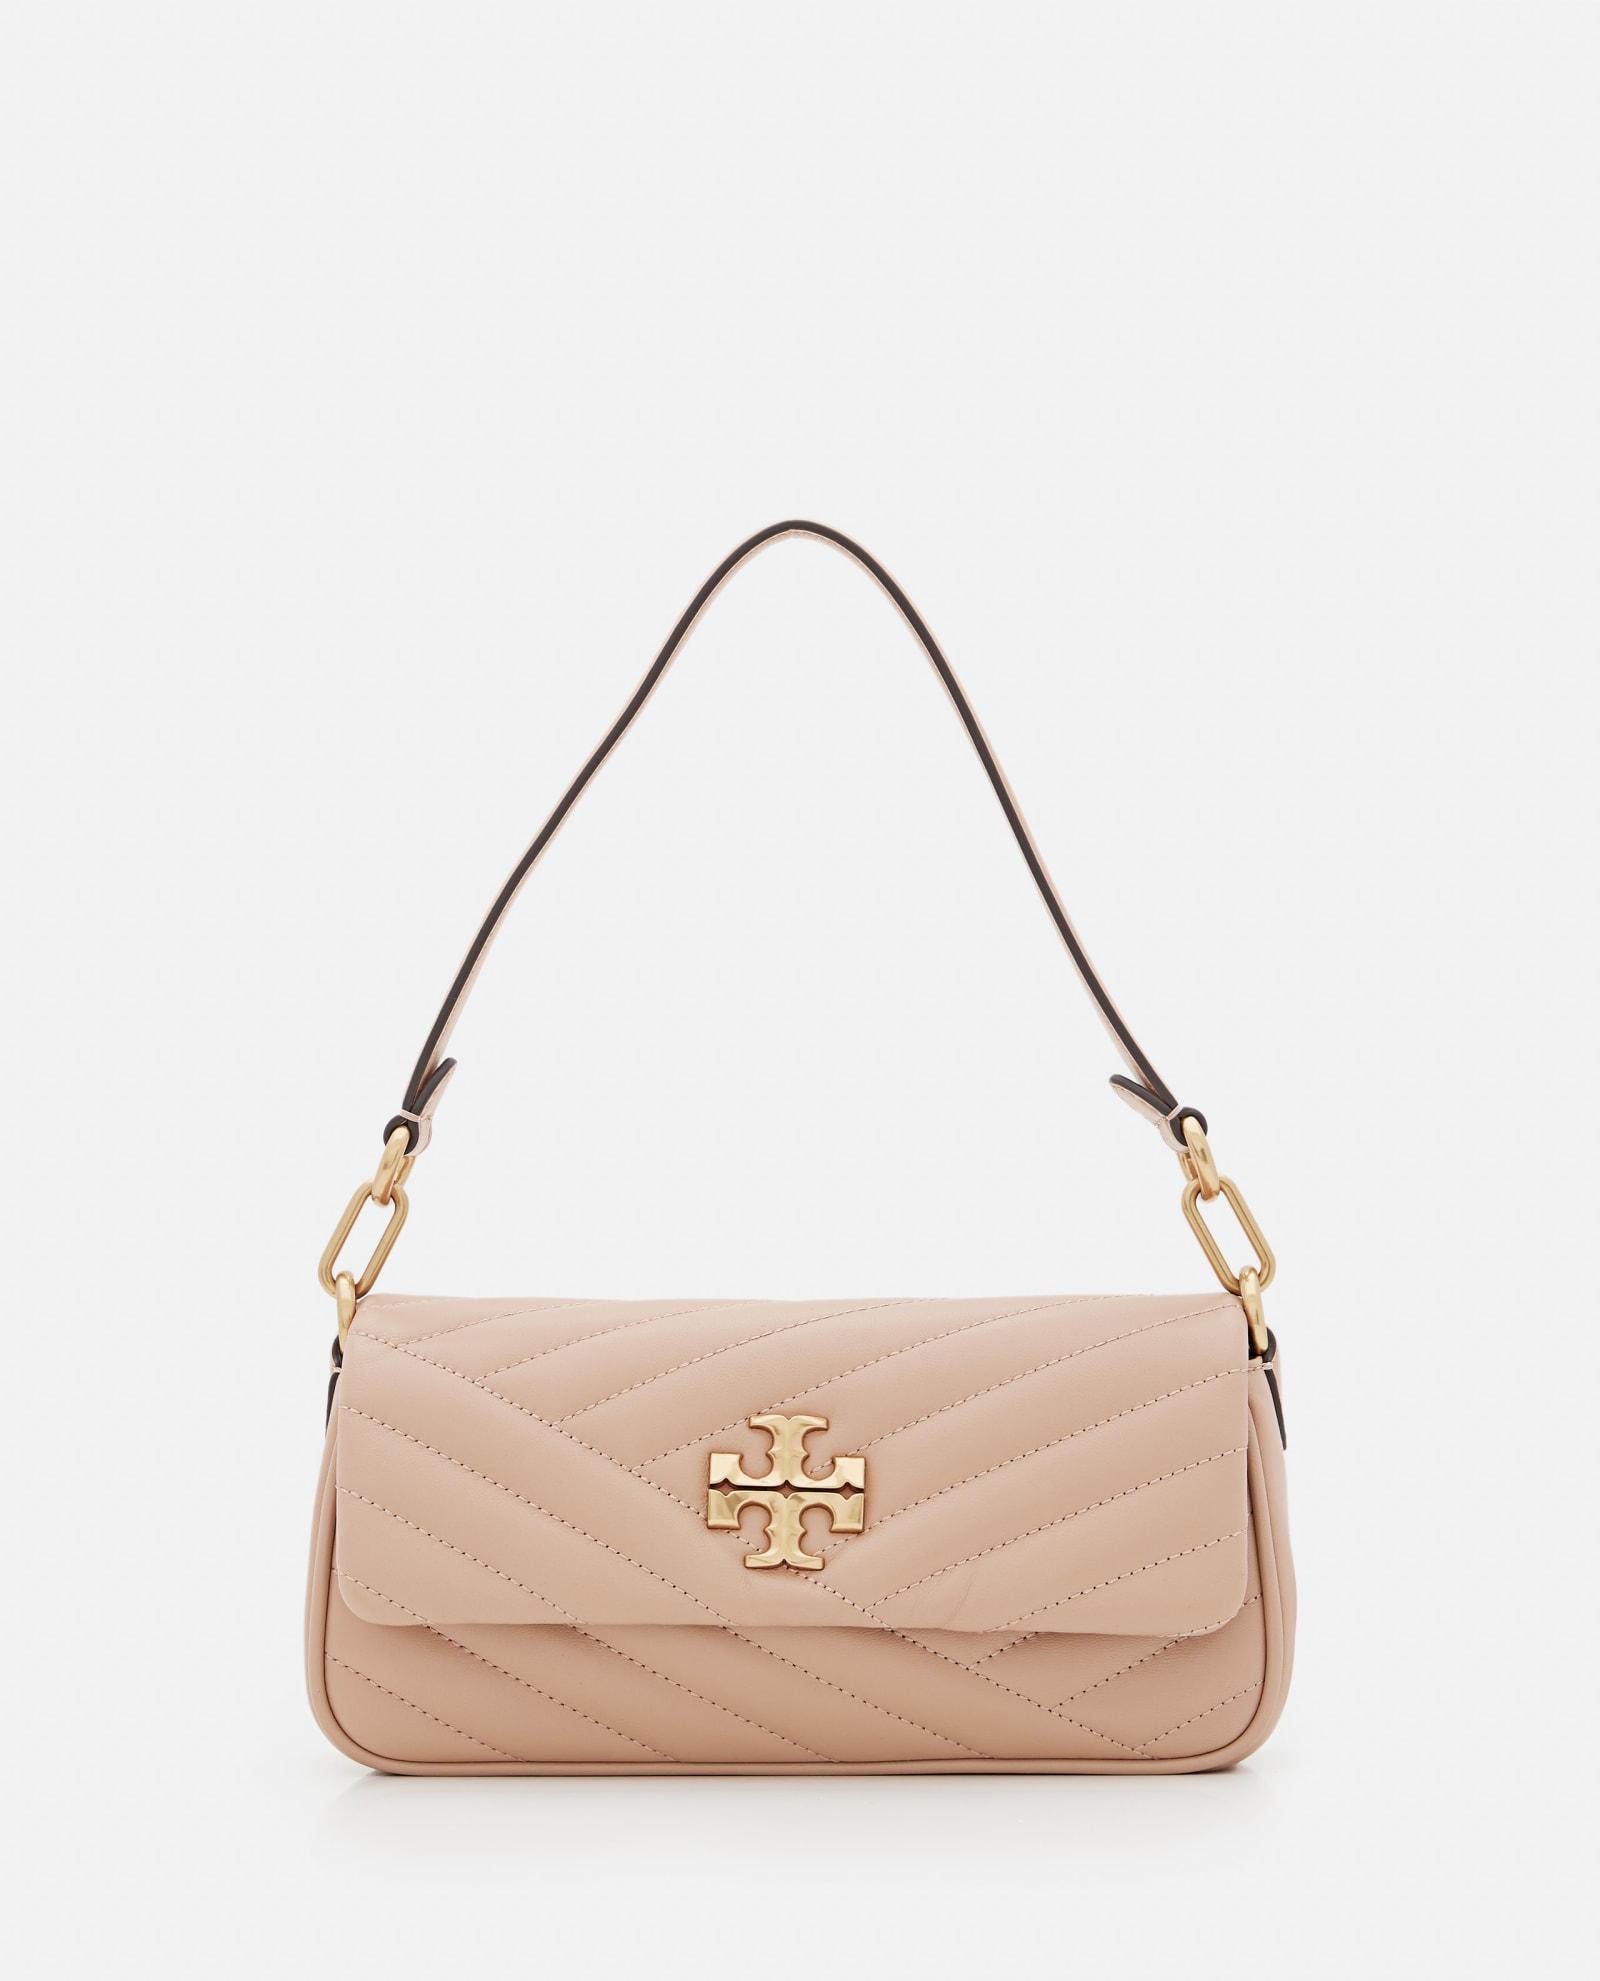 Tory Burch Small Kira Chevron Flap Leather Shoulder Bag in Natural | Lyst